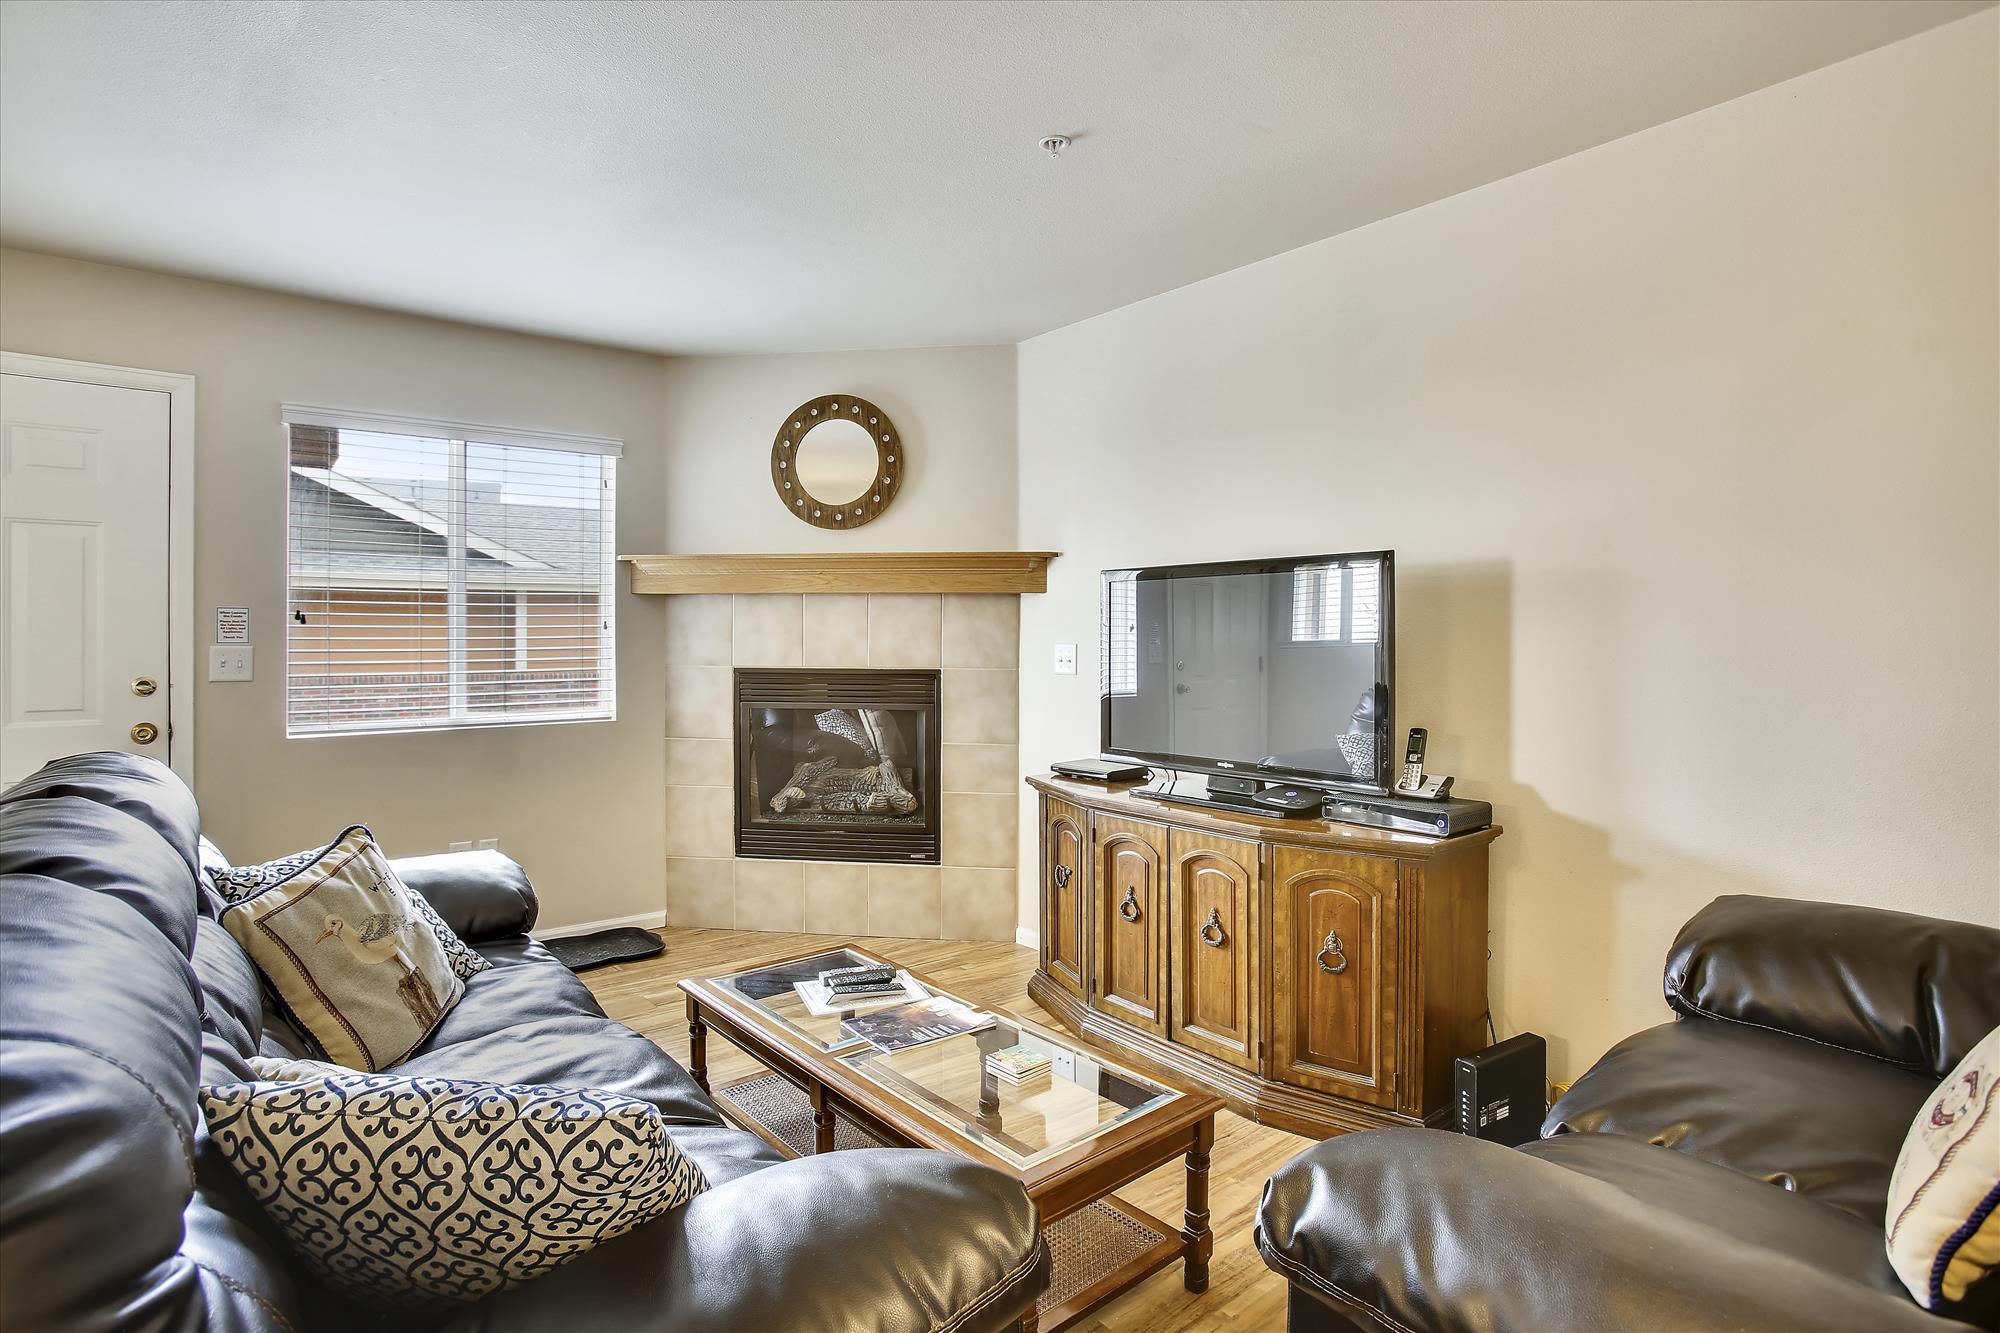 Loveland, Colorado, 80537, 2 Bedrooms Bedrooms, ,2 BathroomsBathrooms,Townhome,Furnished,Carina Circle Unit #106,1046